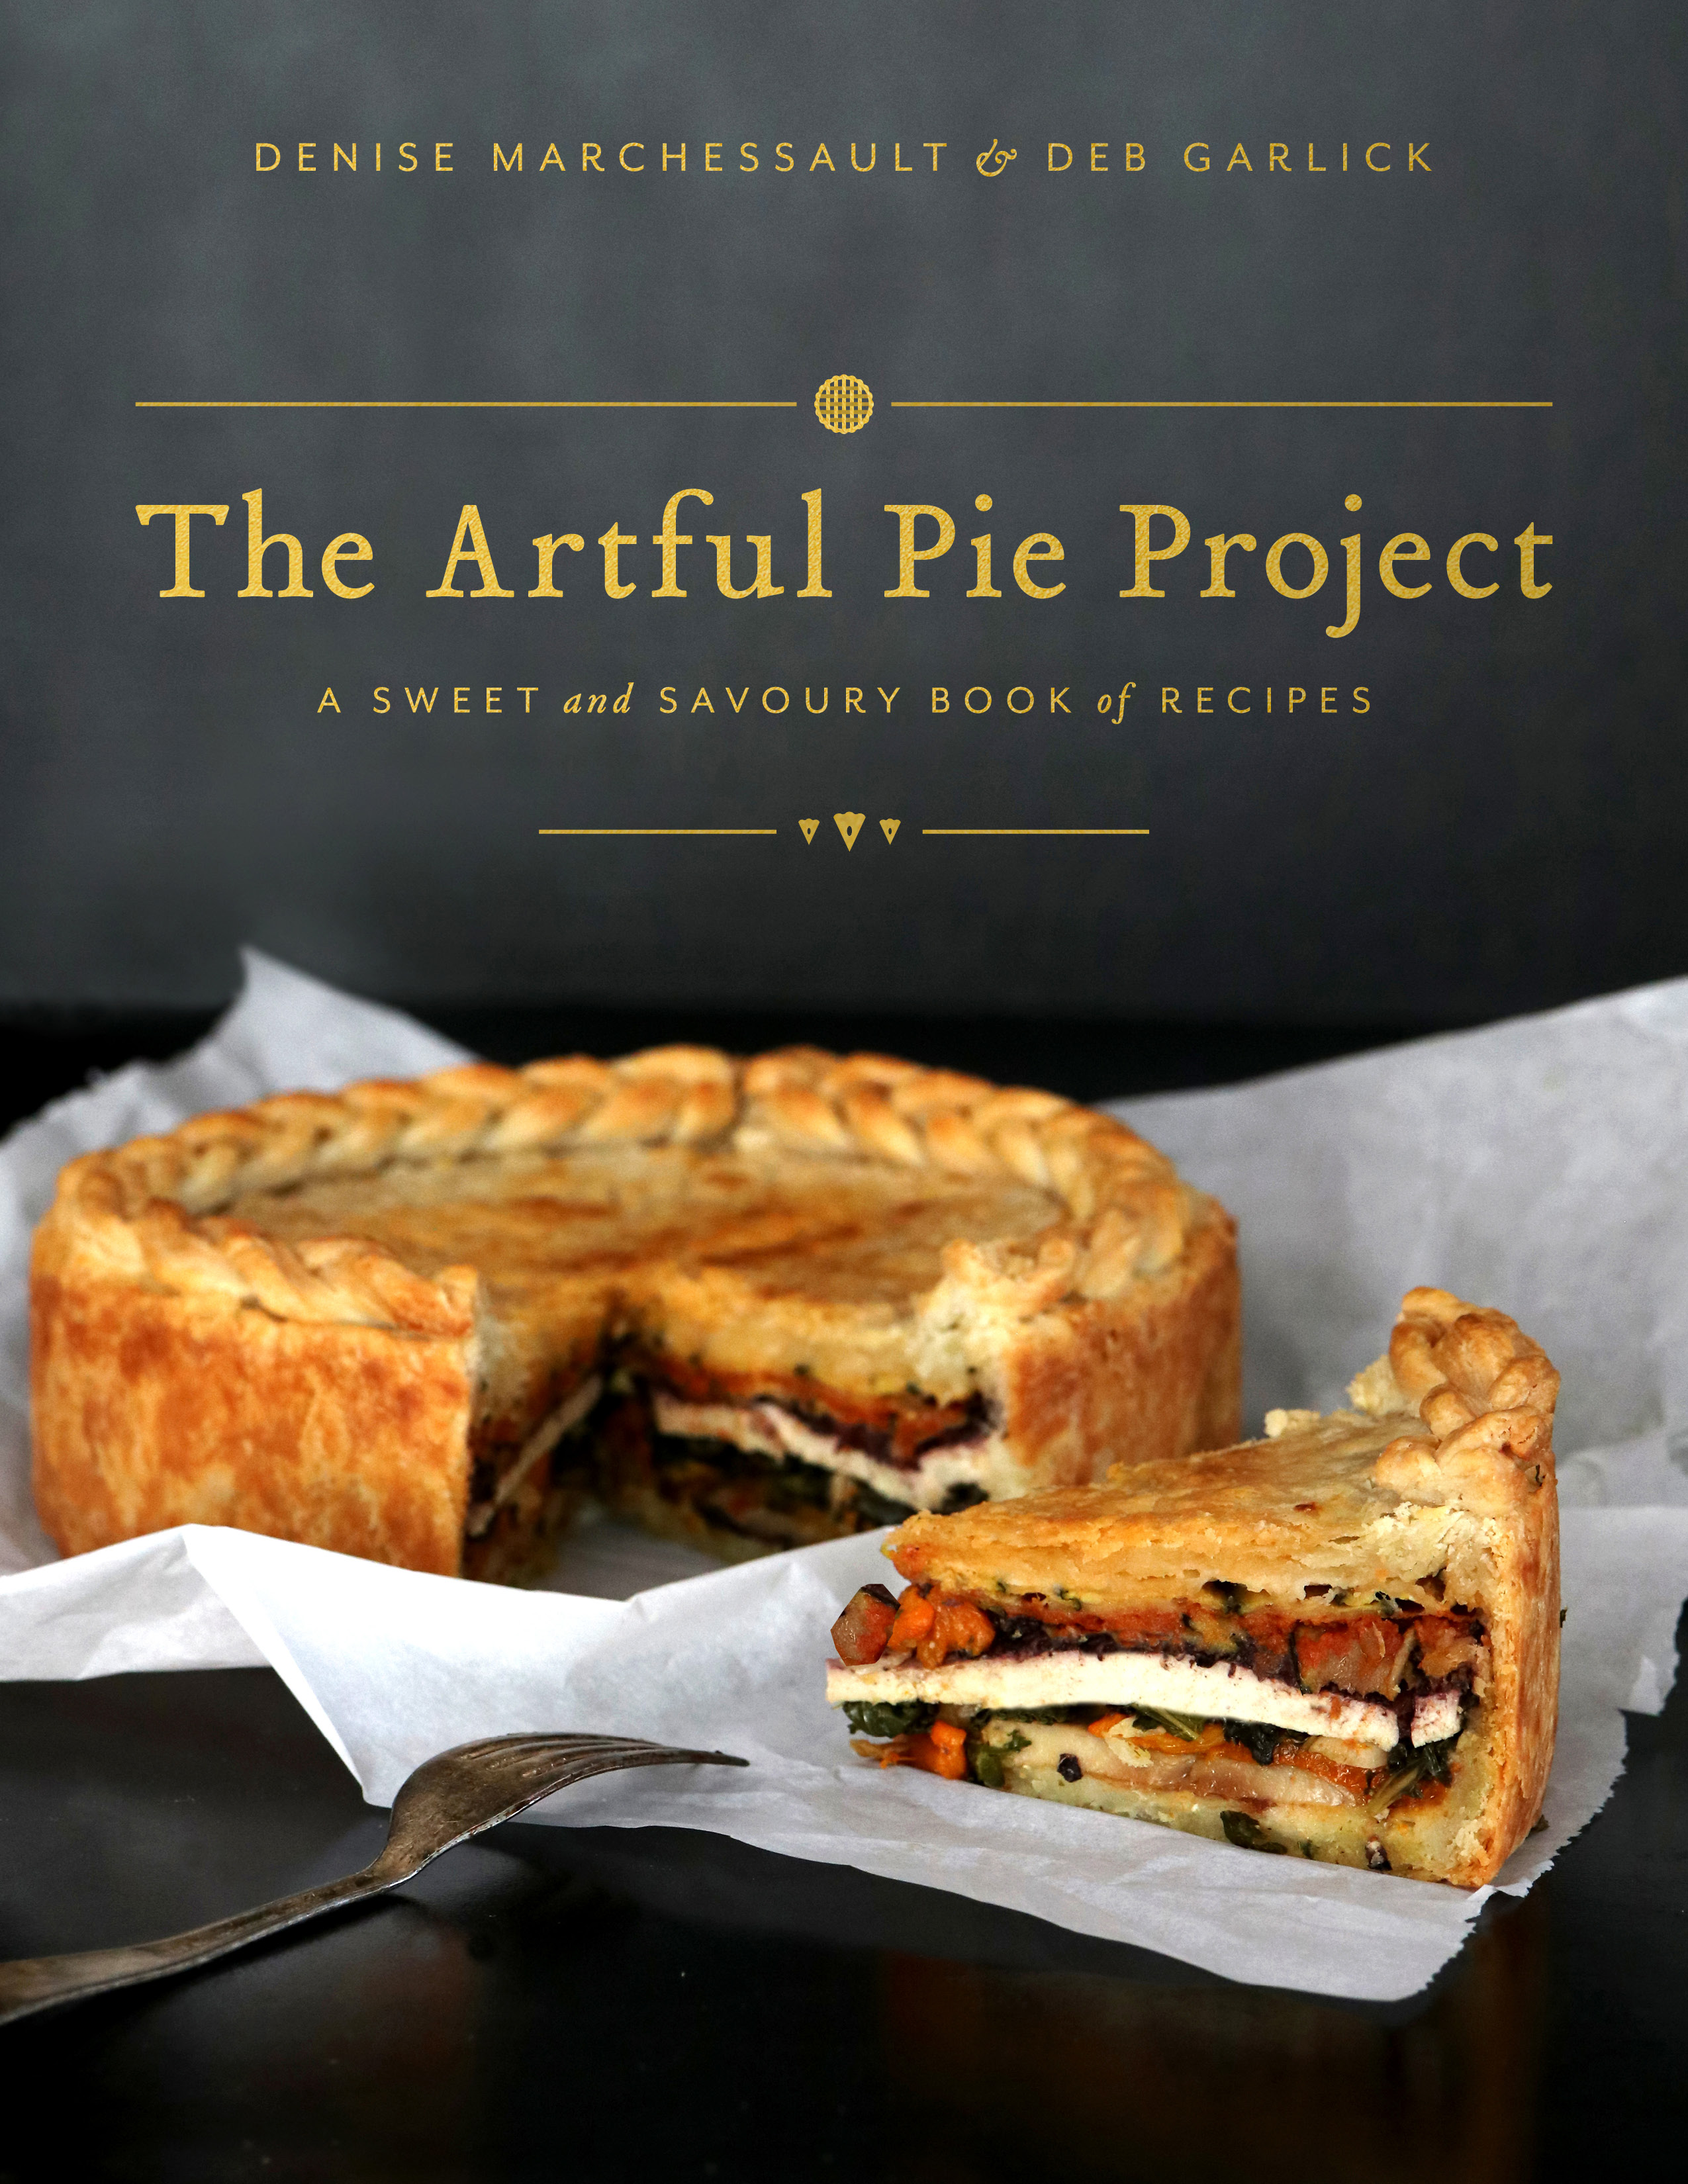 Artful Pie Project, the